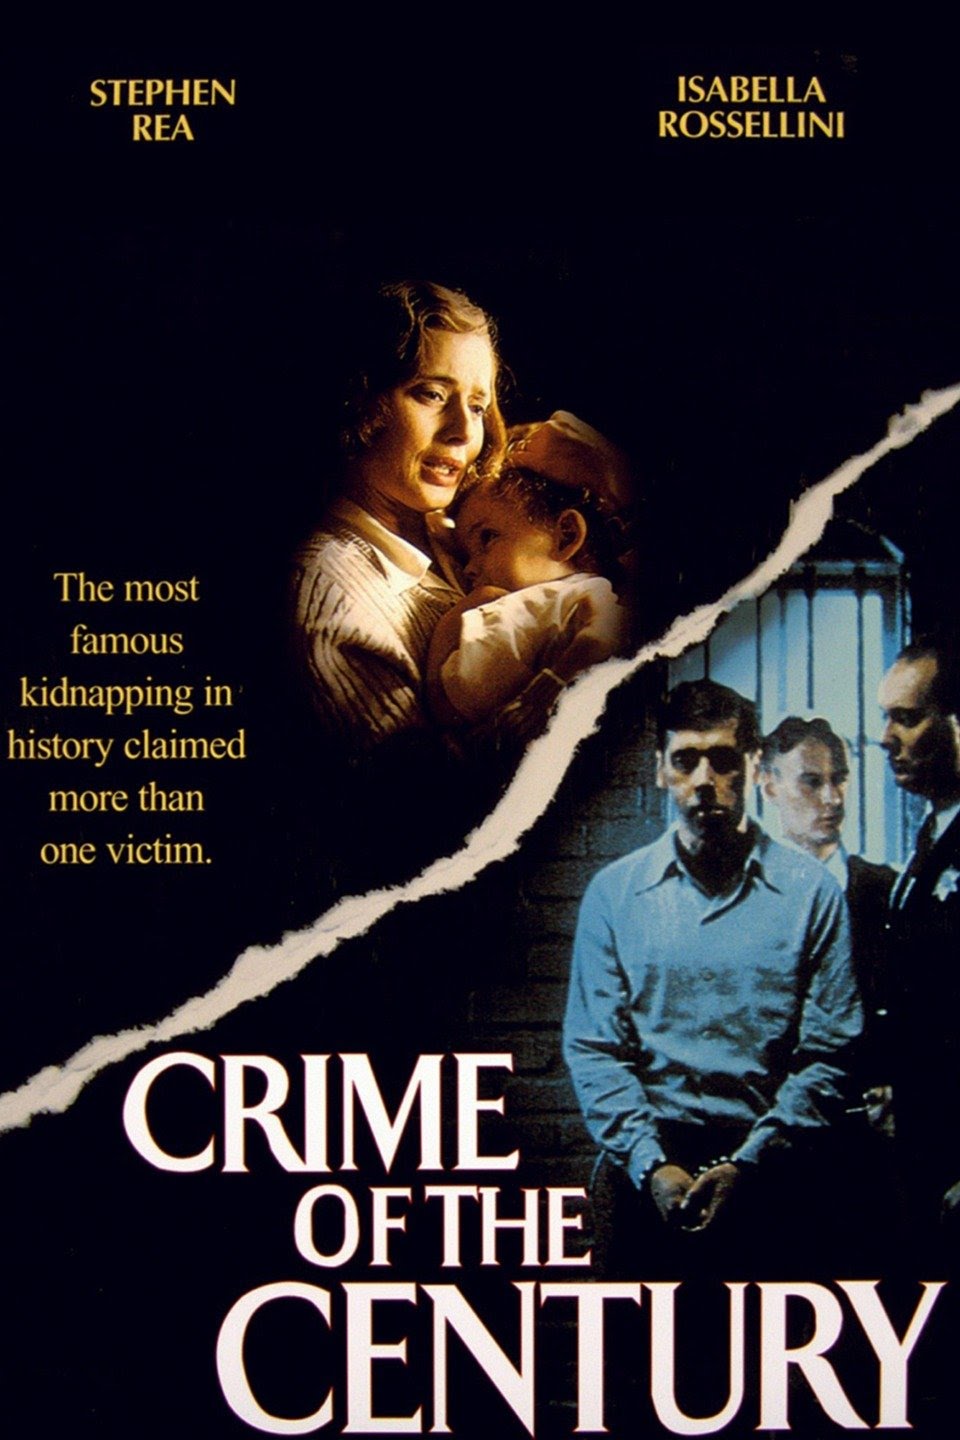 Crime of the Century Dvd (1996)